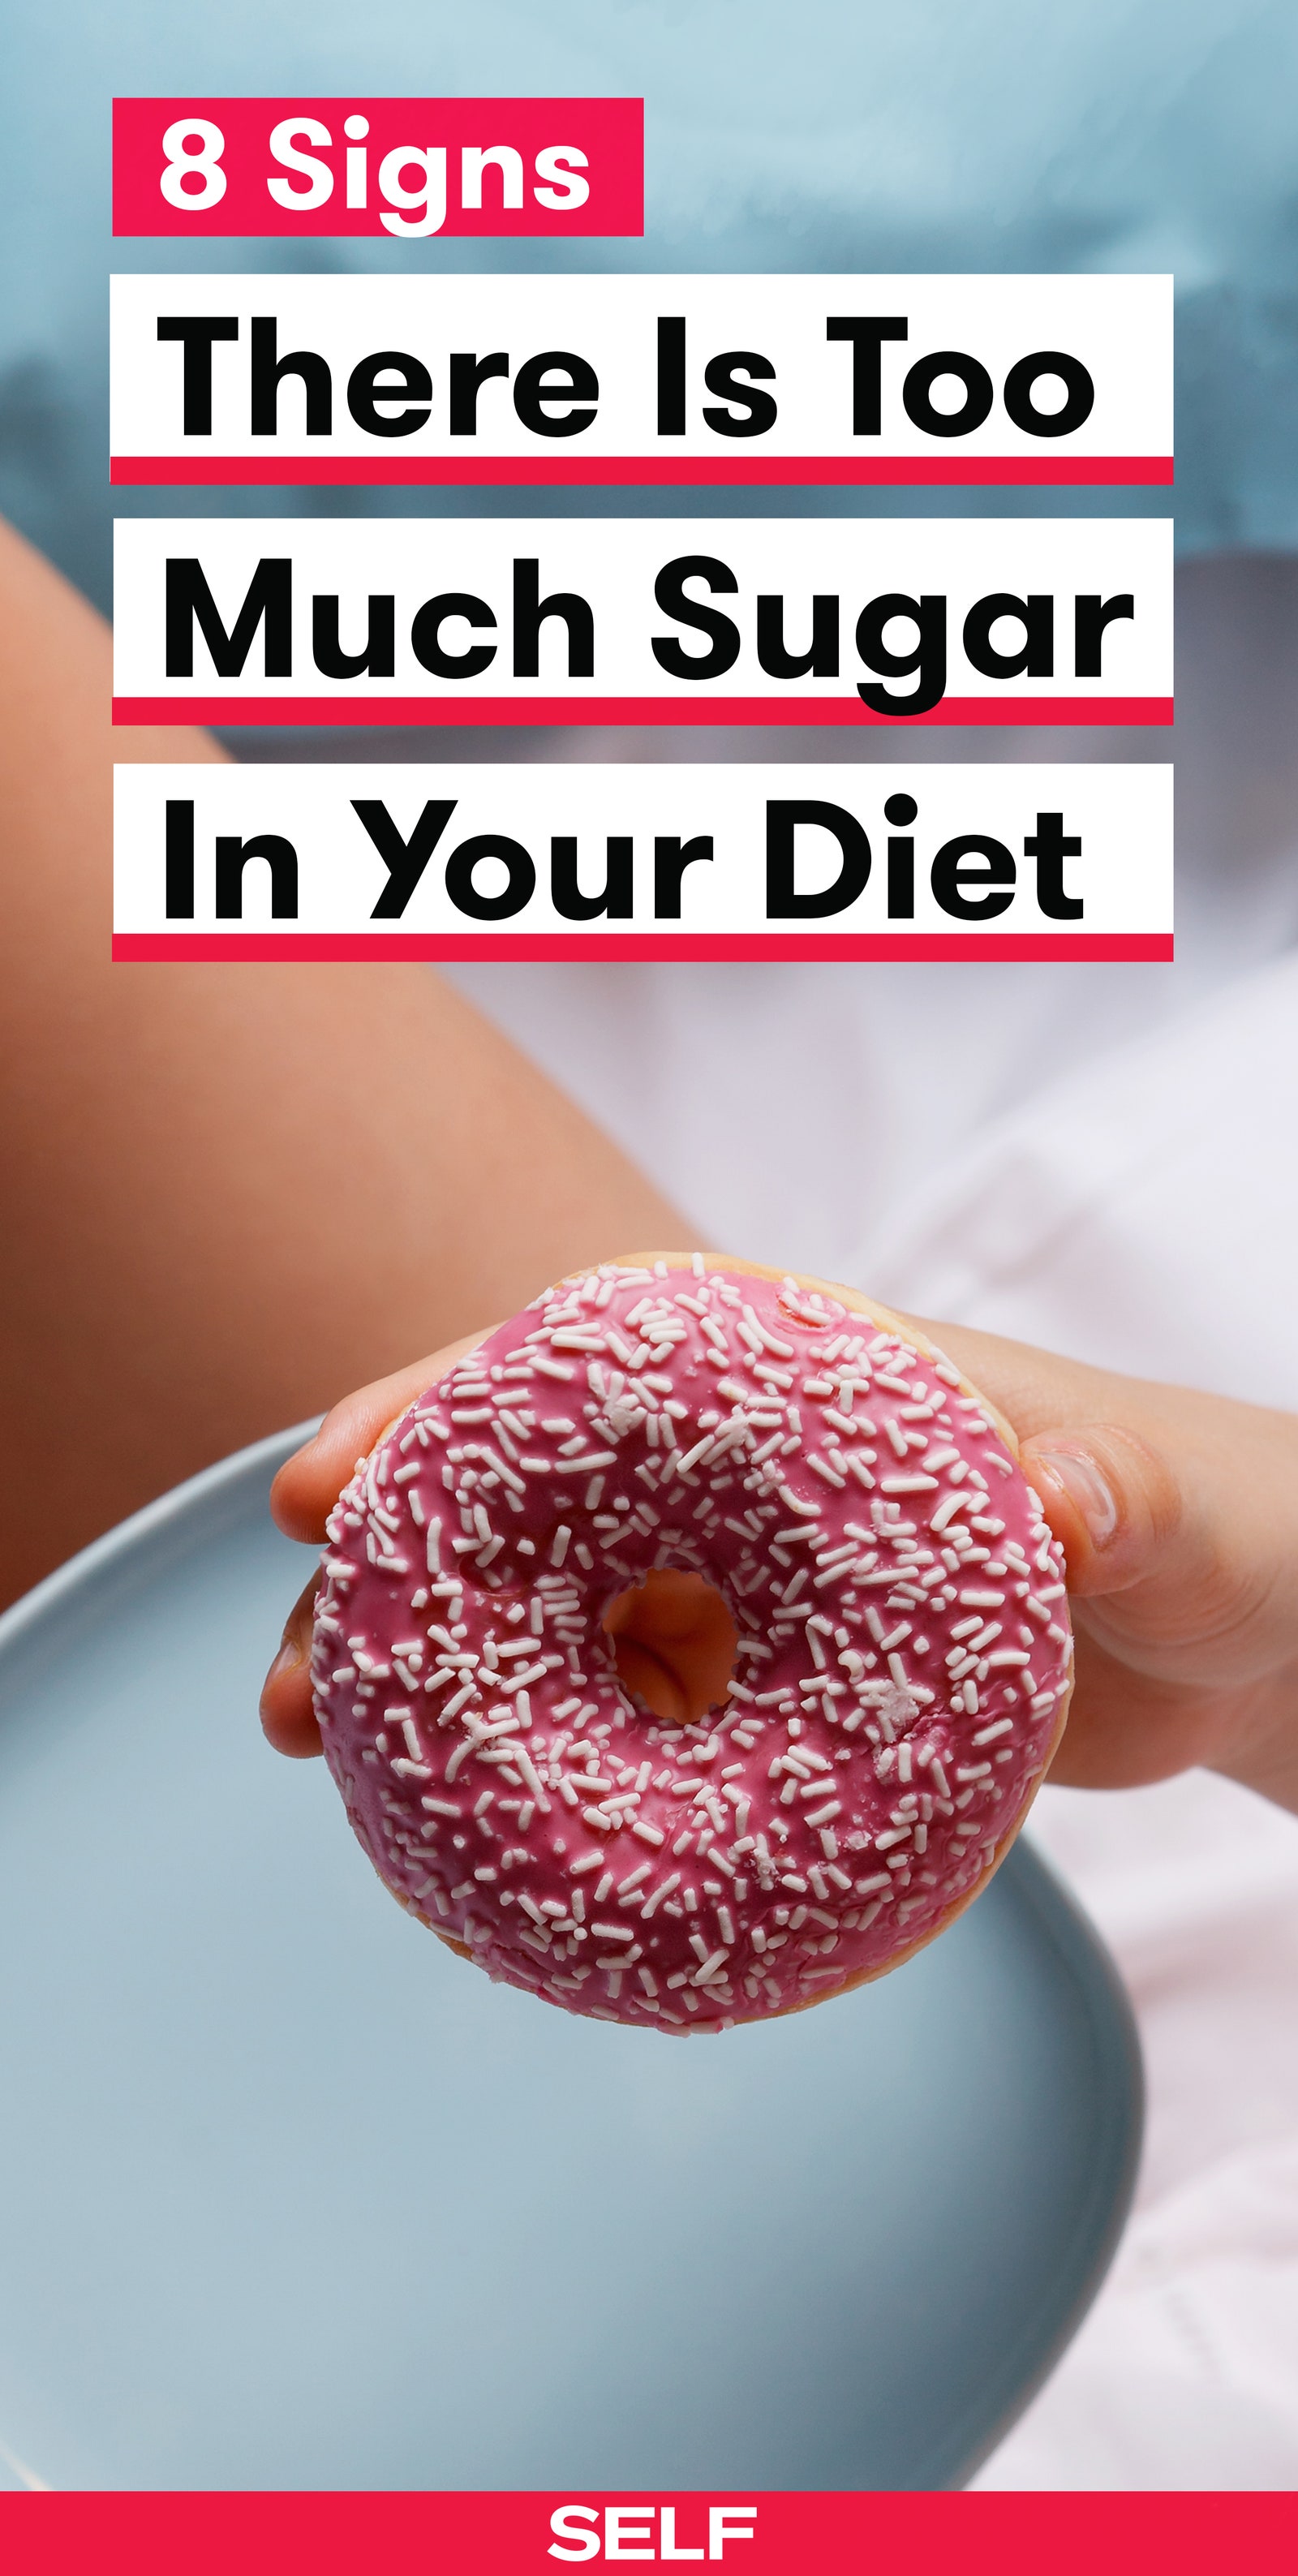 Can Eating Too Much Sugar Make You Poop a Lot?